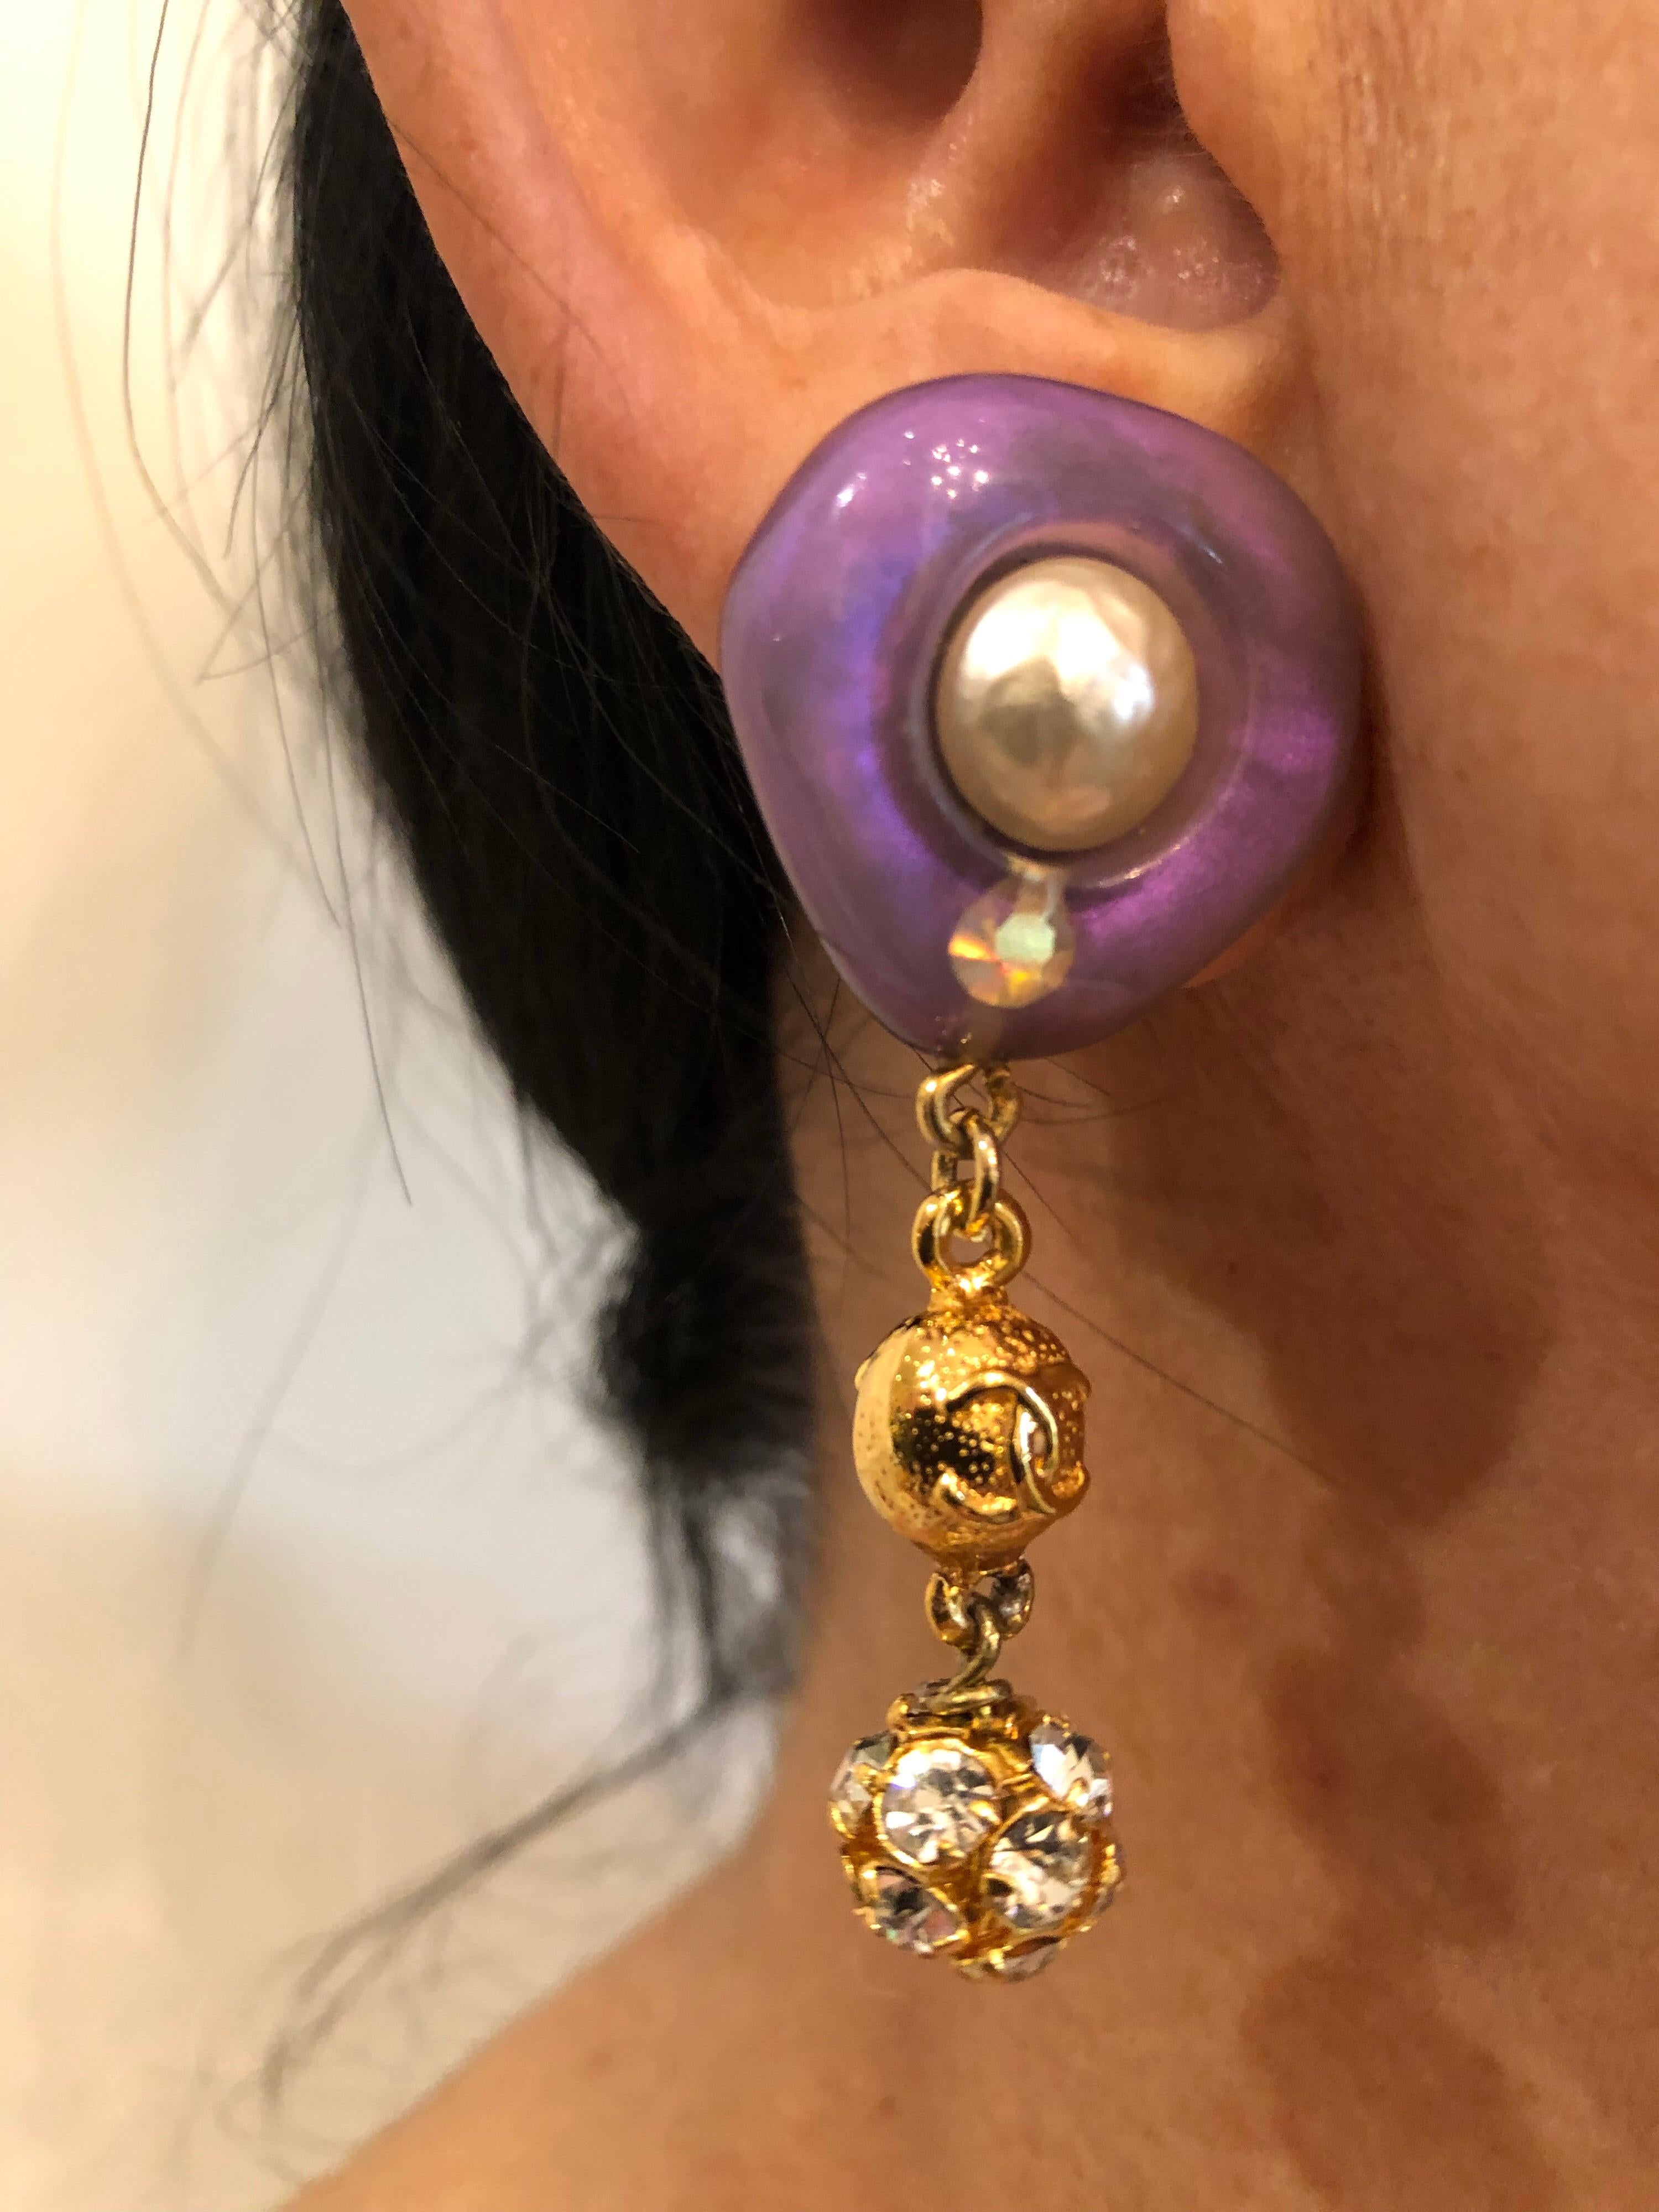 Vintage Coco Chanel 1996 cruise collection lavender faux pearl statement earrings - the important earrings feature the late Karl Lagerfeld's approach to modernizing the house of Chanel in the 1990s by adding whimsy and pastel colors in his